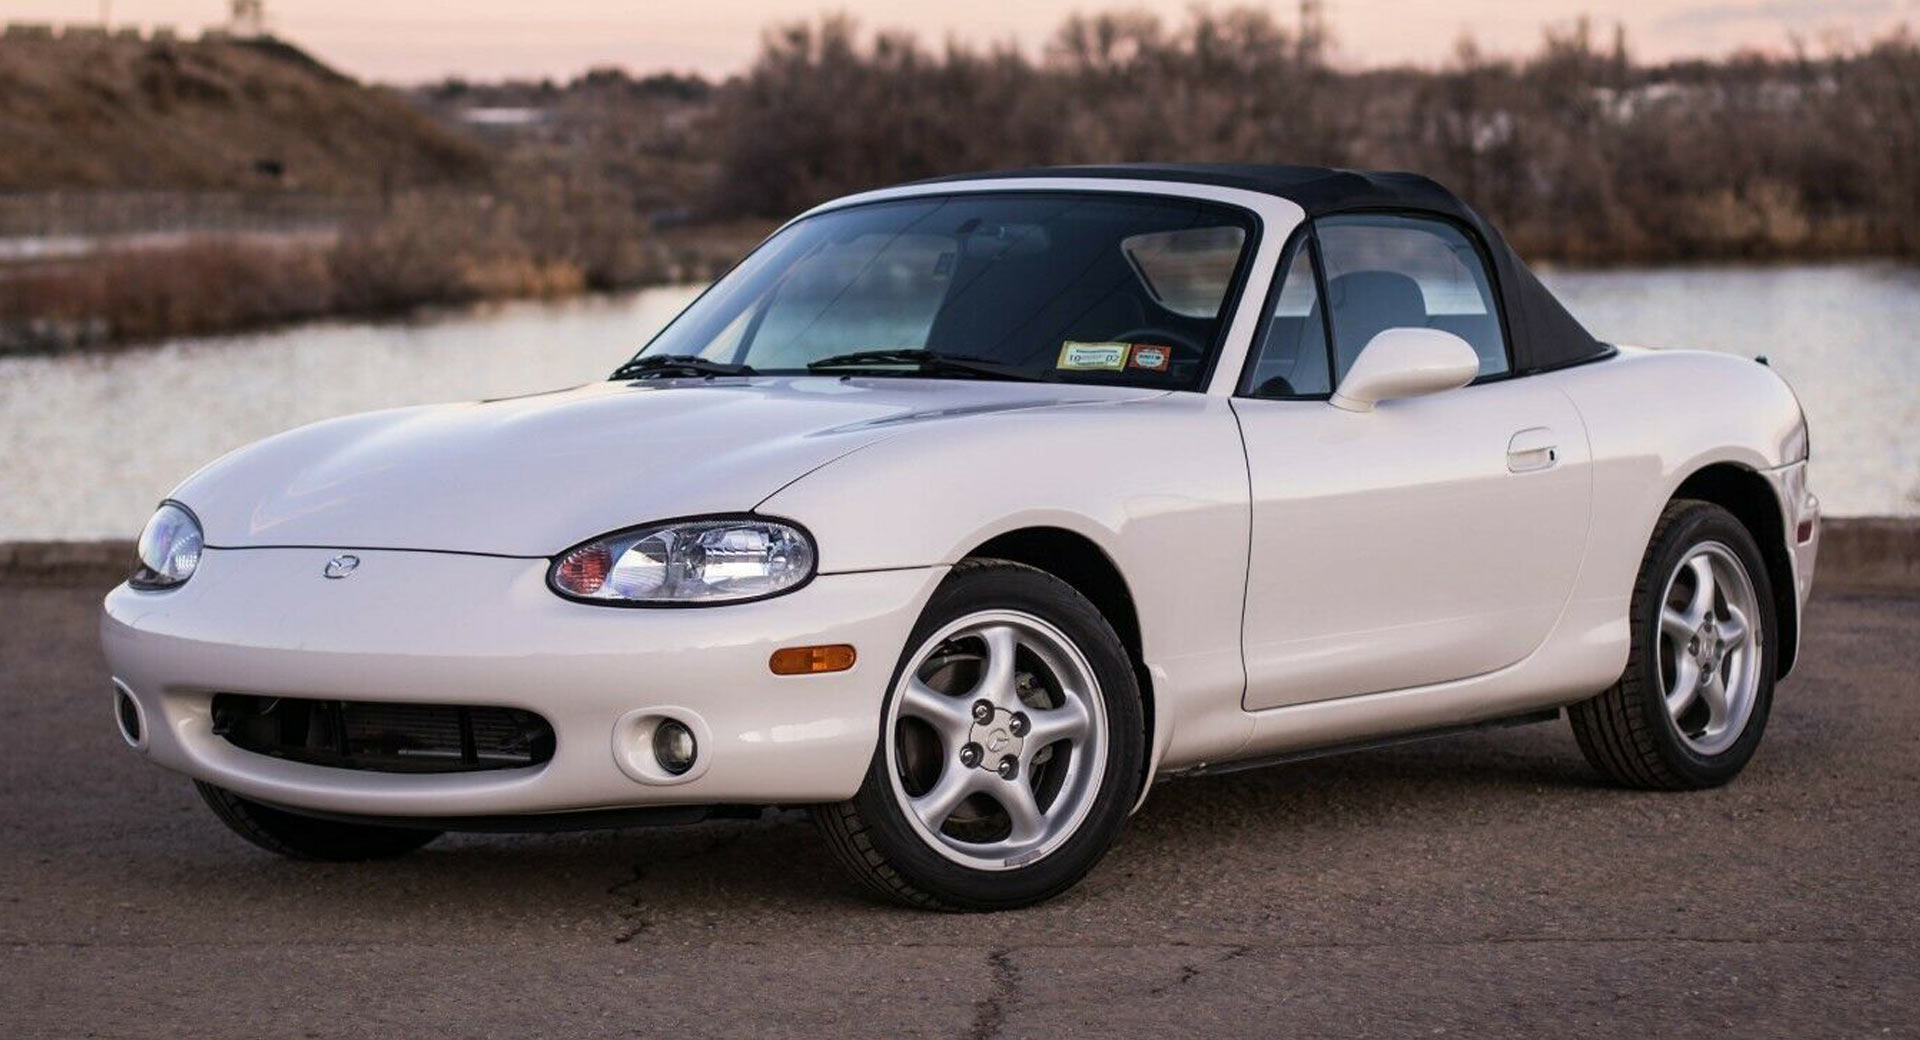 Get Ready For Summer With This 20 Year Old, 1,200 Mile Mazda MX-5 Miata |  Carscoops